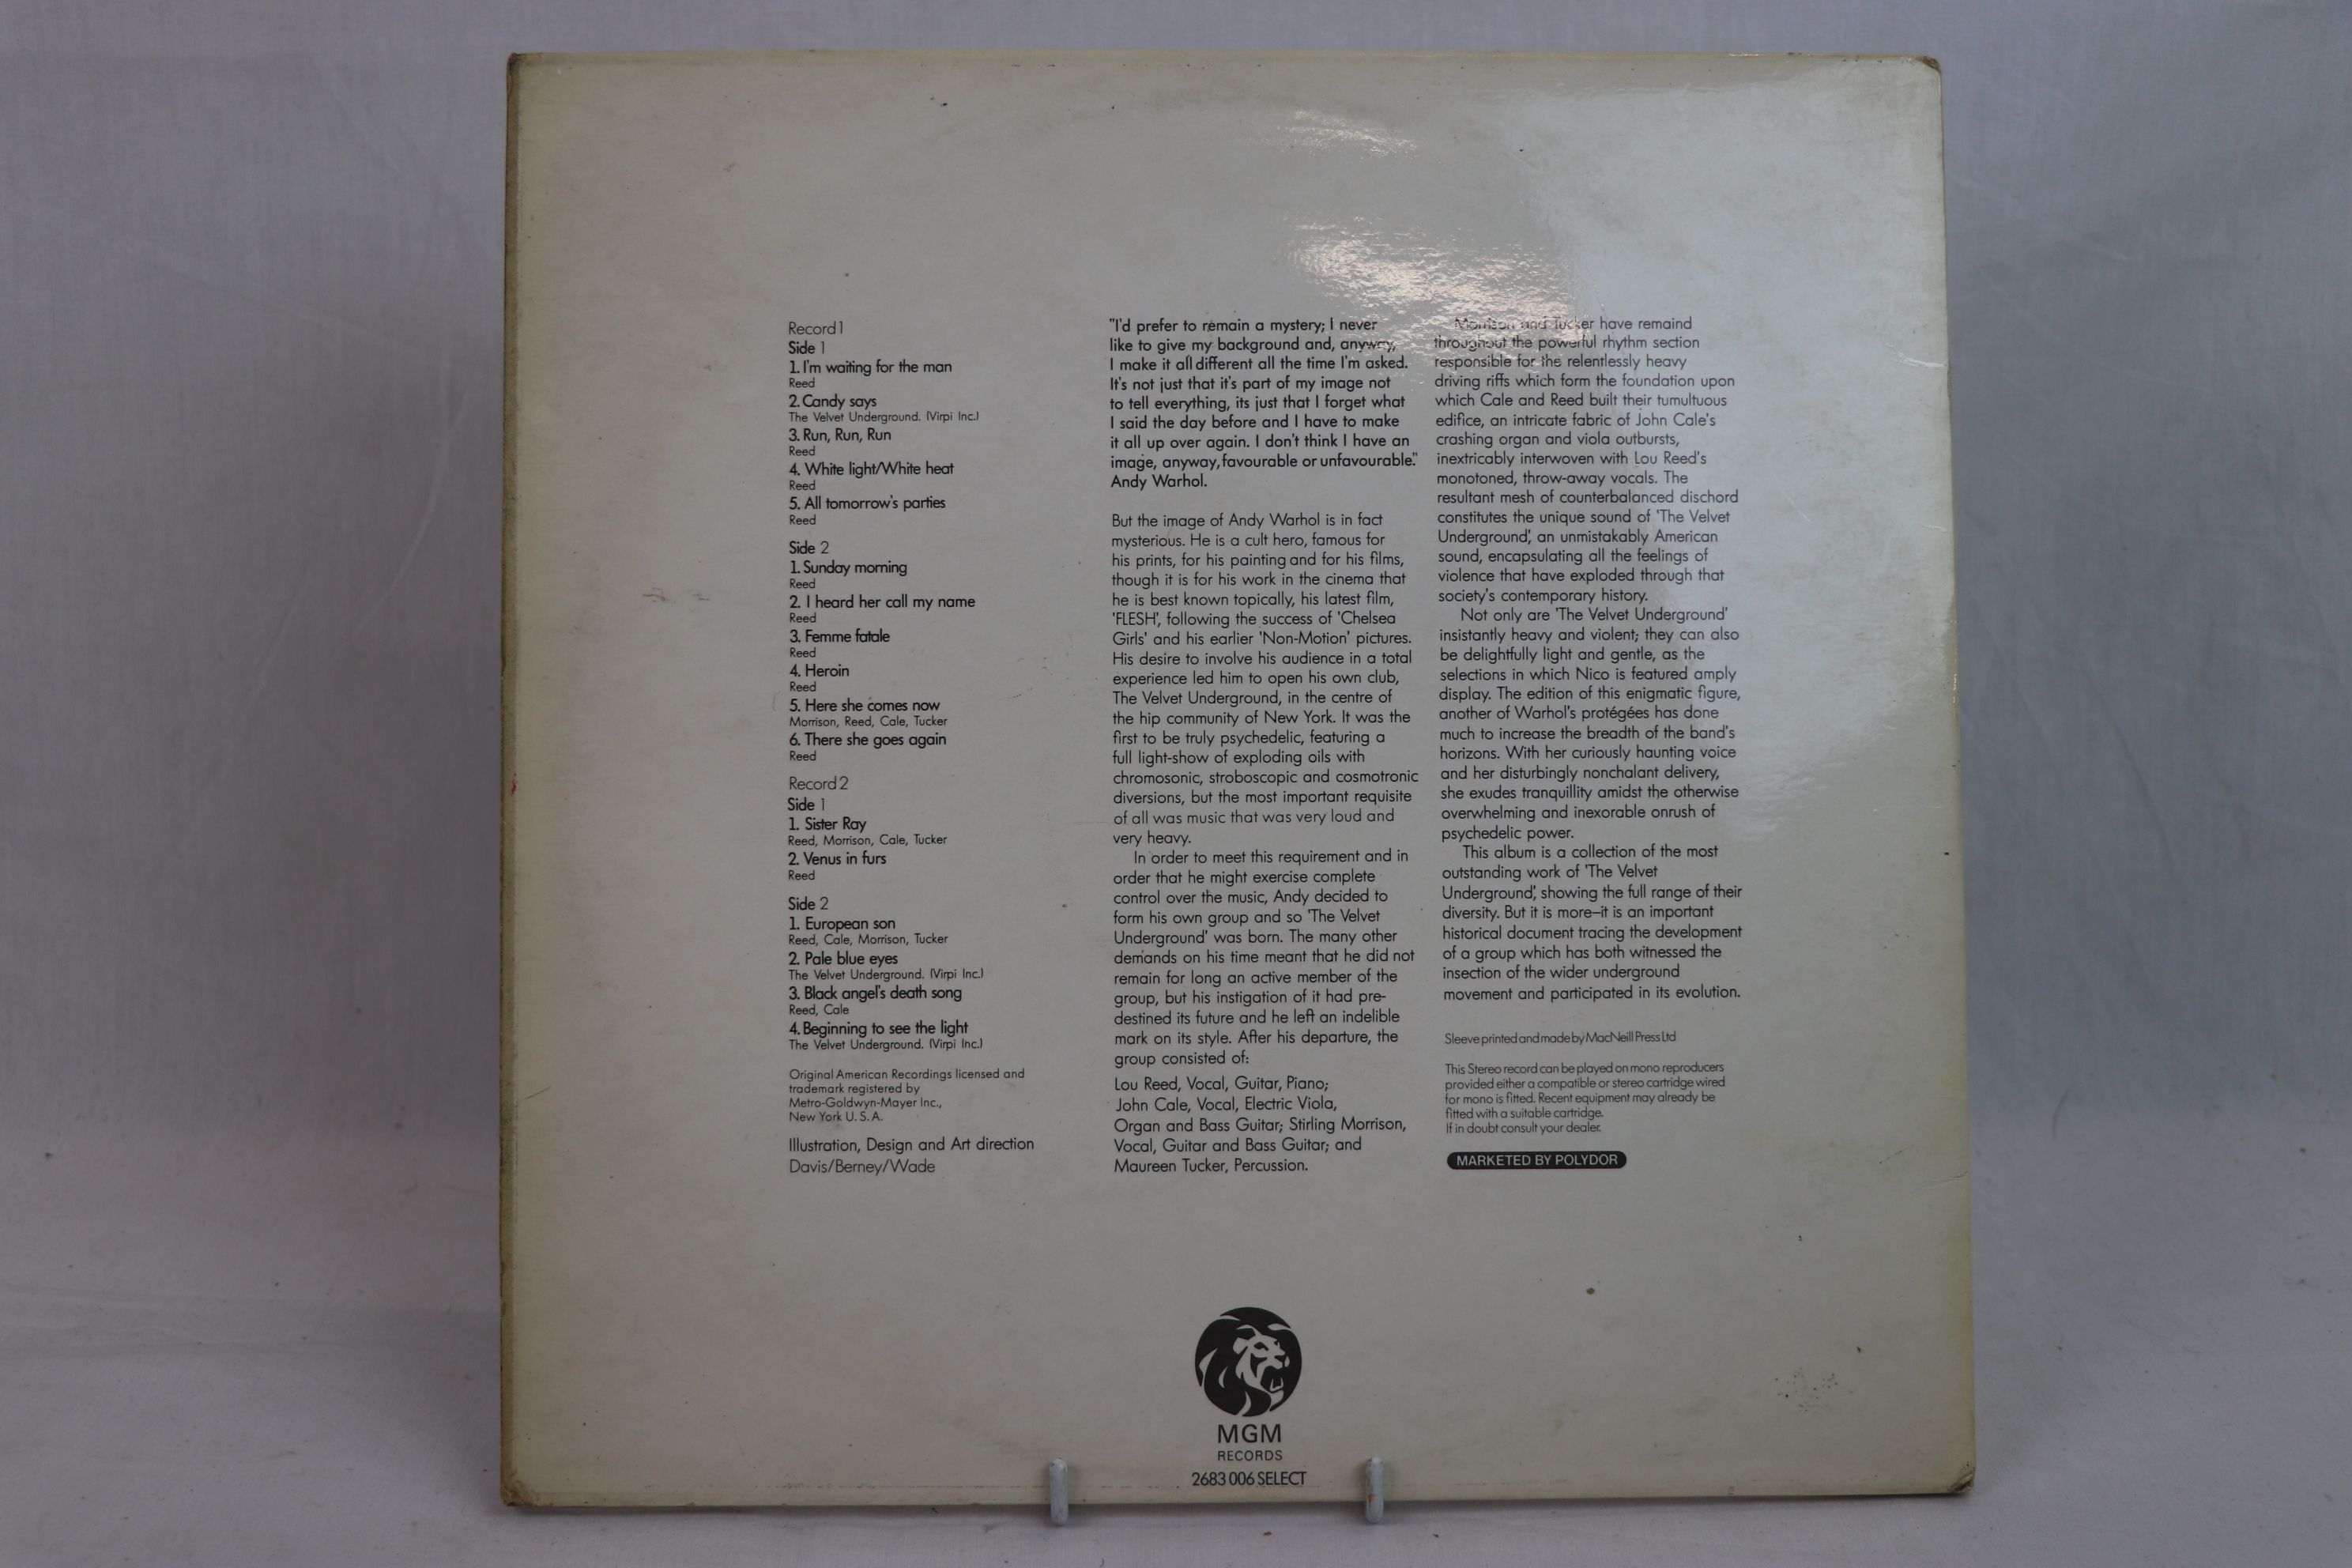 Vinyl - Andy Warhol's Velvet Underground Featuring Nico Double LP 1st press release on MGM Select - Image 8 of 8